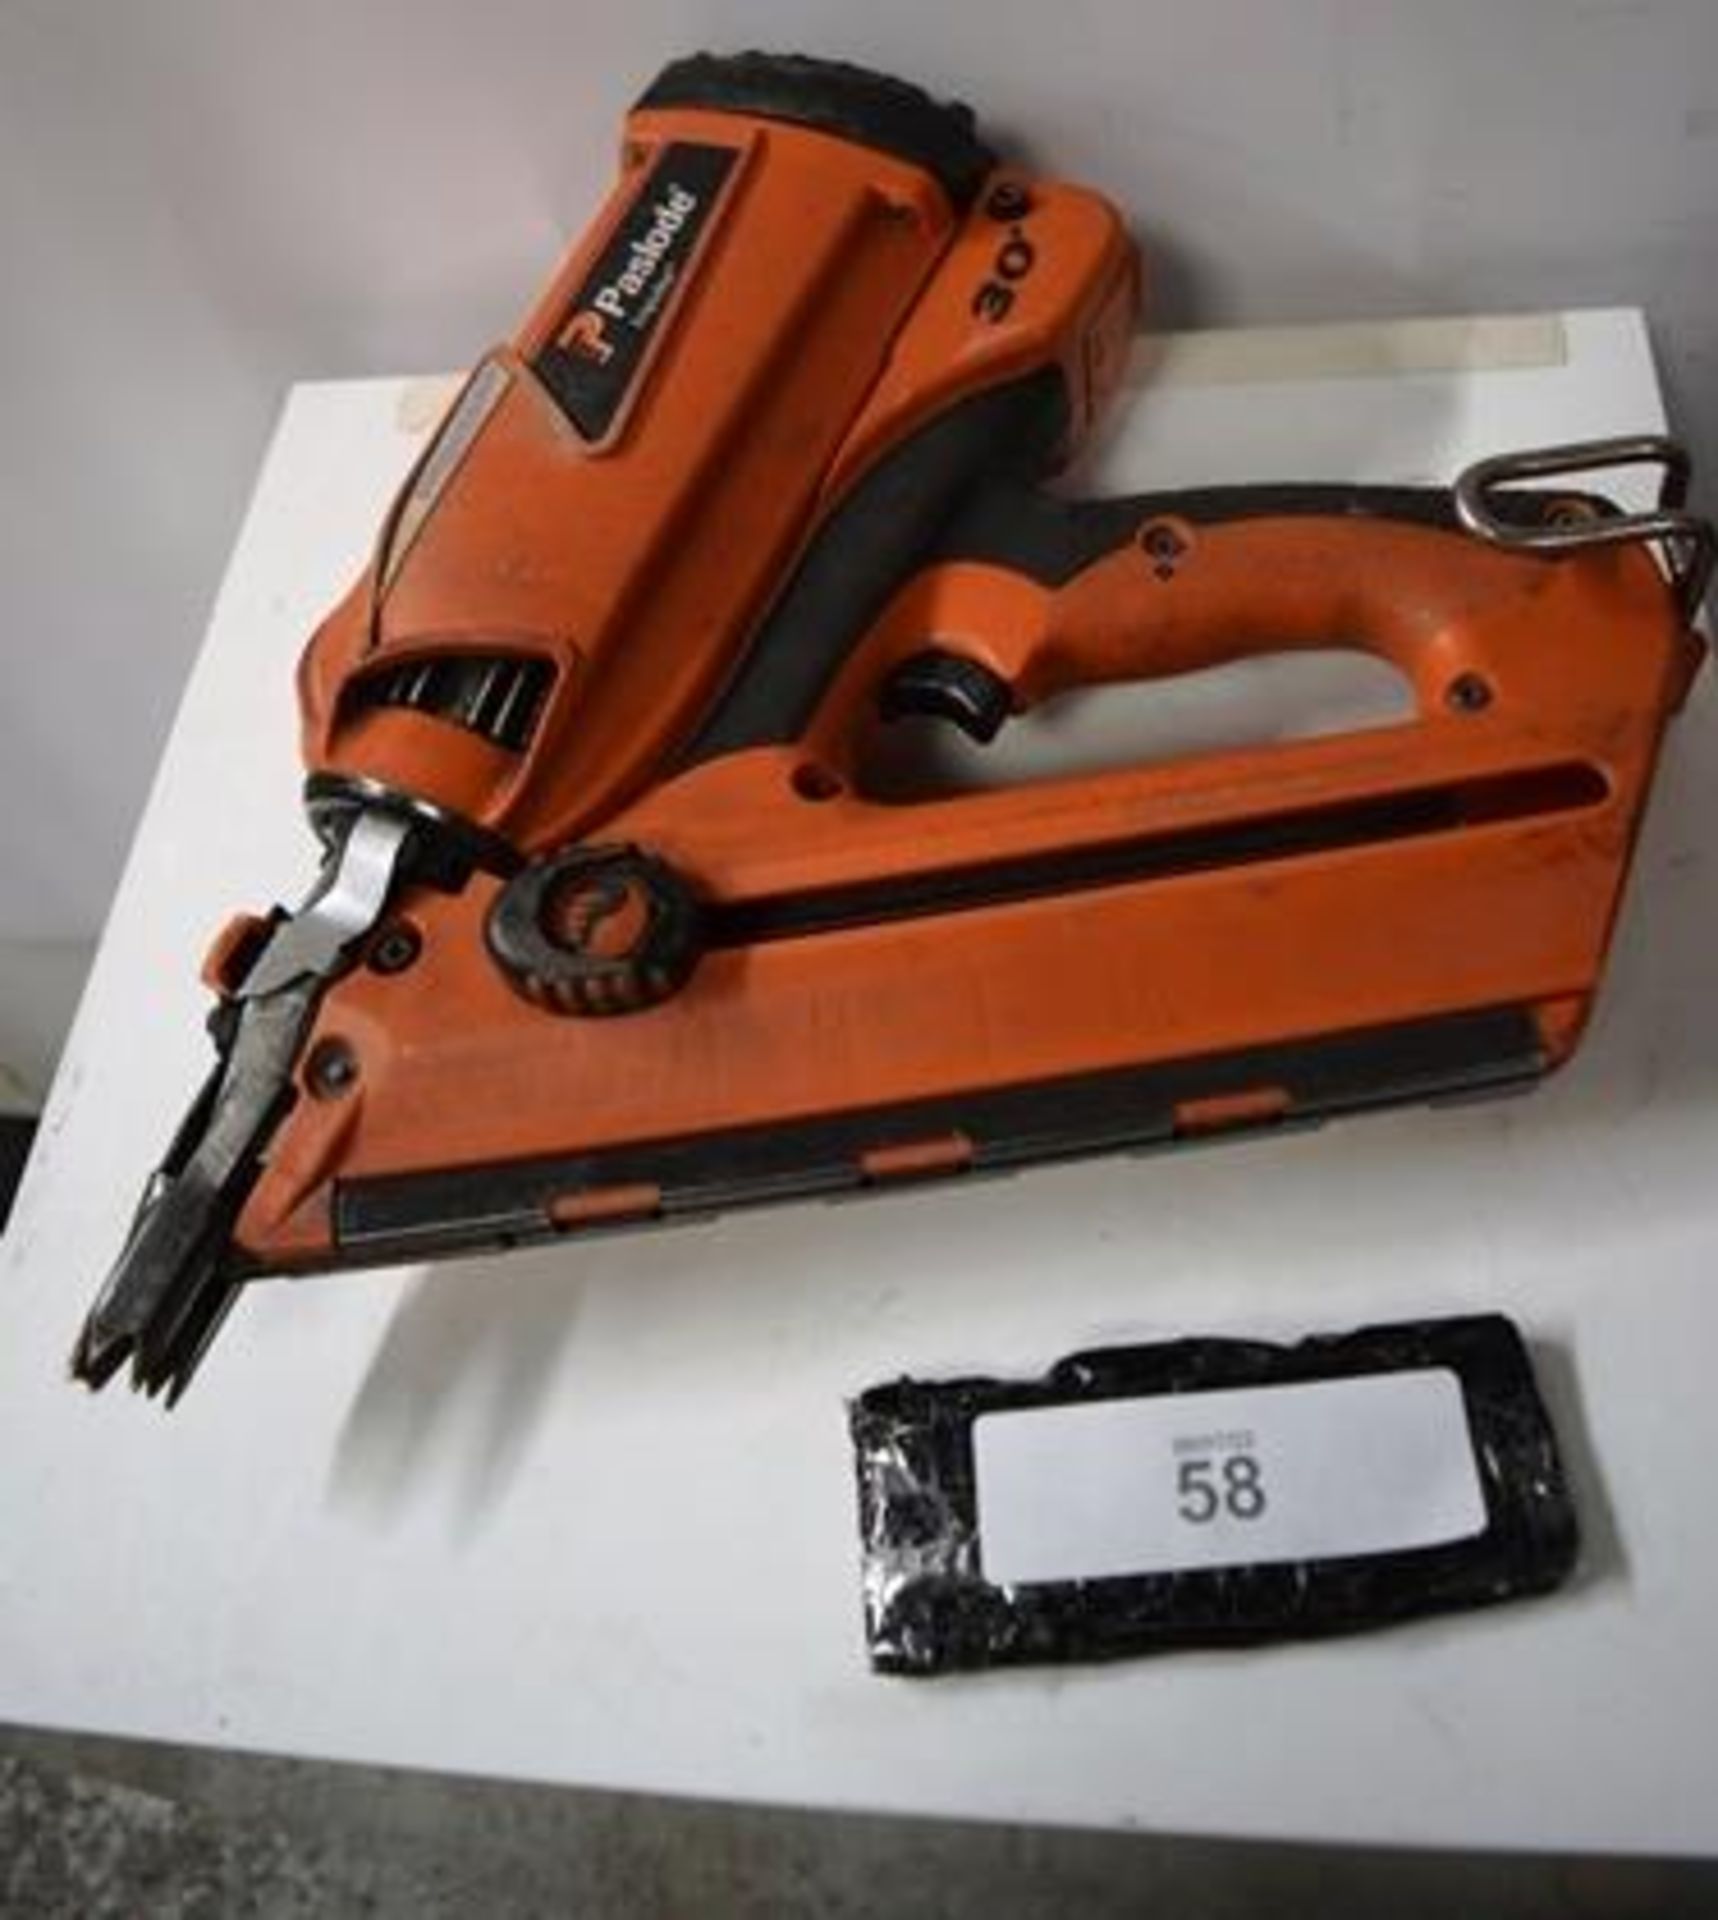 1 x Paslode Impulse nail stapler gun, model IM350+ Lithium, with 1 x charger and heavy duty case - - Image 3 of 4